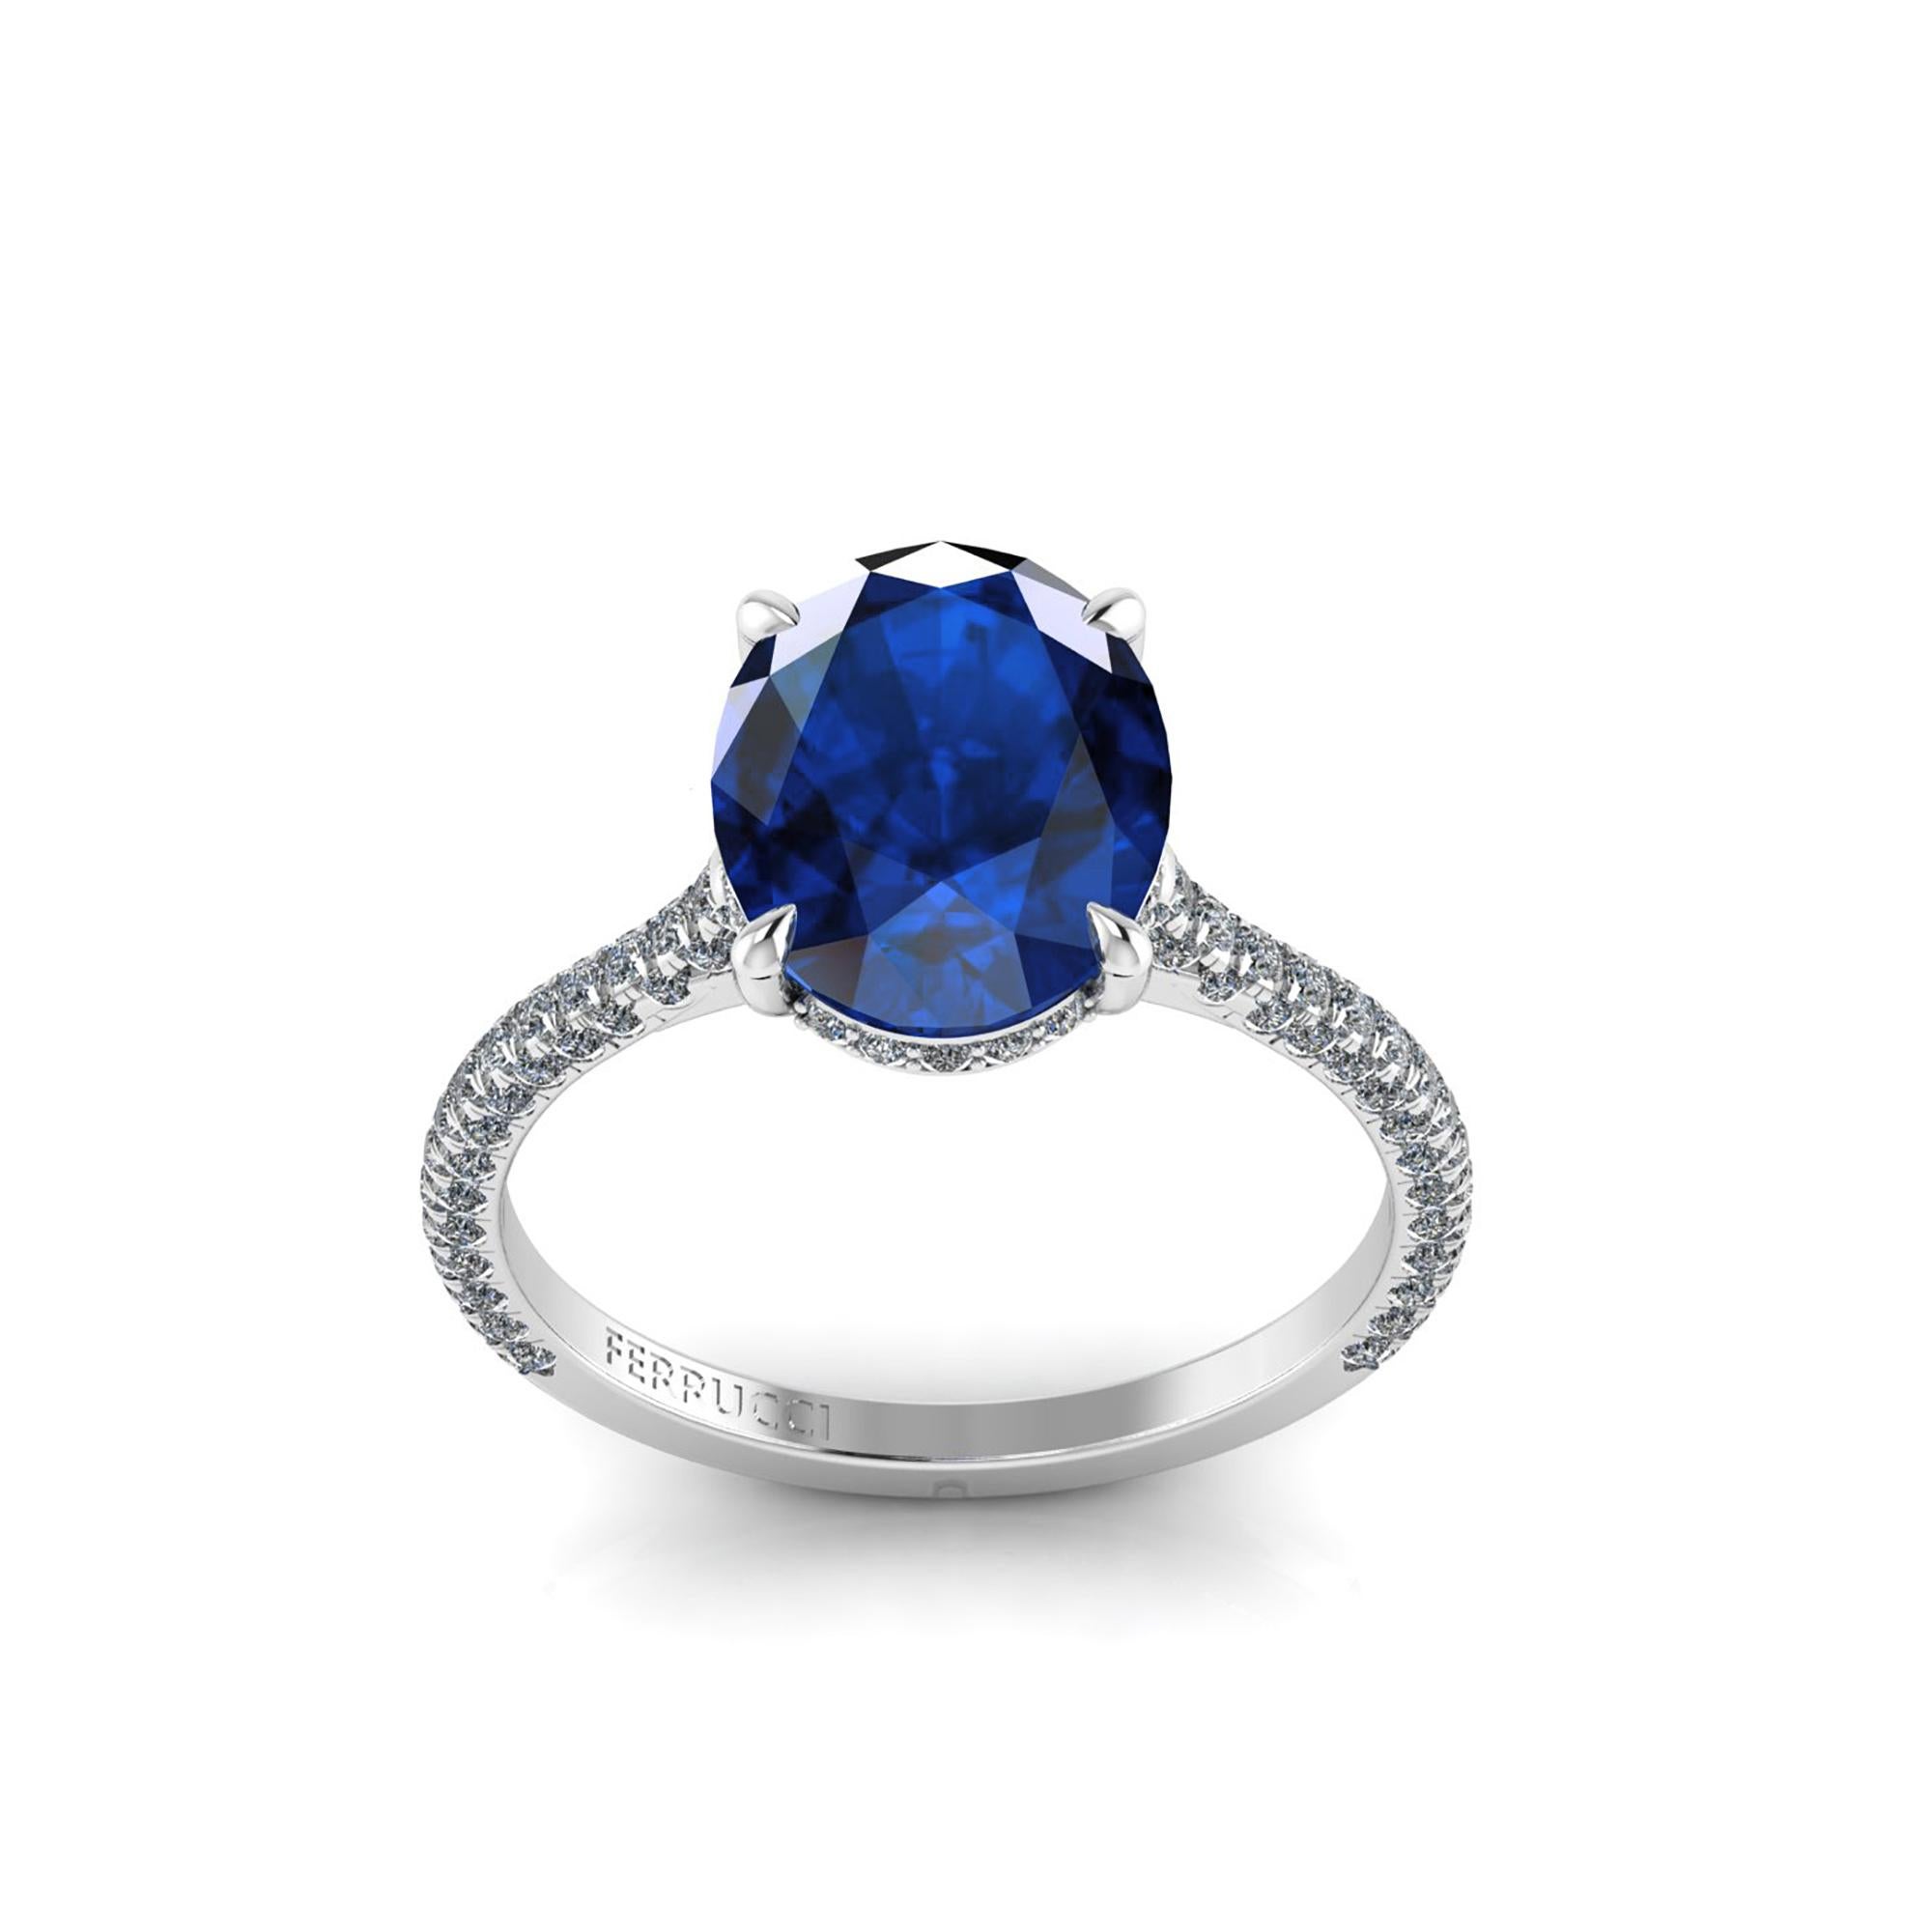 GIA Certified 3.34 carat from Madagascar, blue Oval Sapphire,  conceived in an hand made Platinum ring,
adorned with a shower of ultra white diamonds, hand set on almost every surface to give the maximum light reflection and sparkle.
The total carat